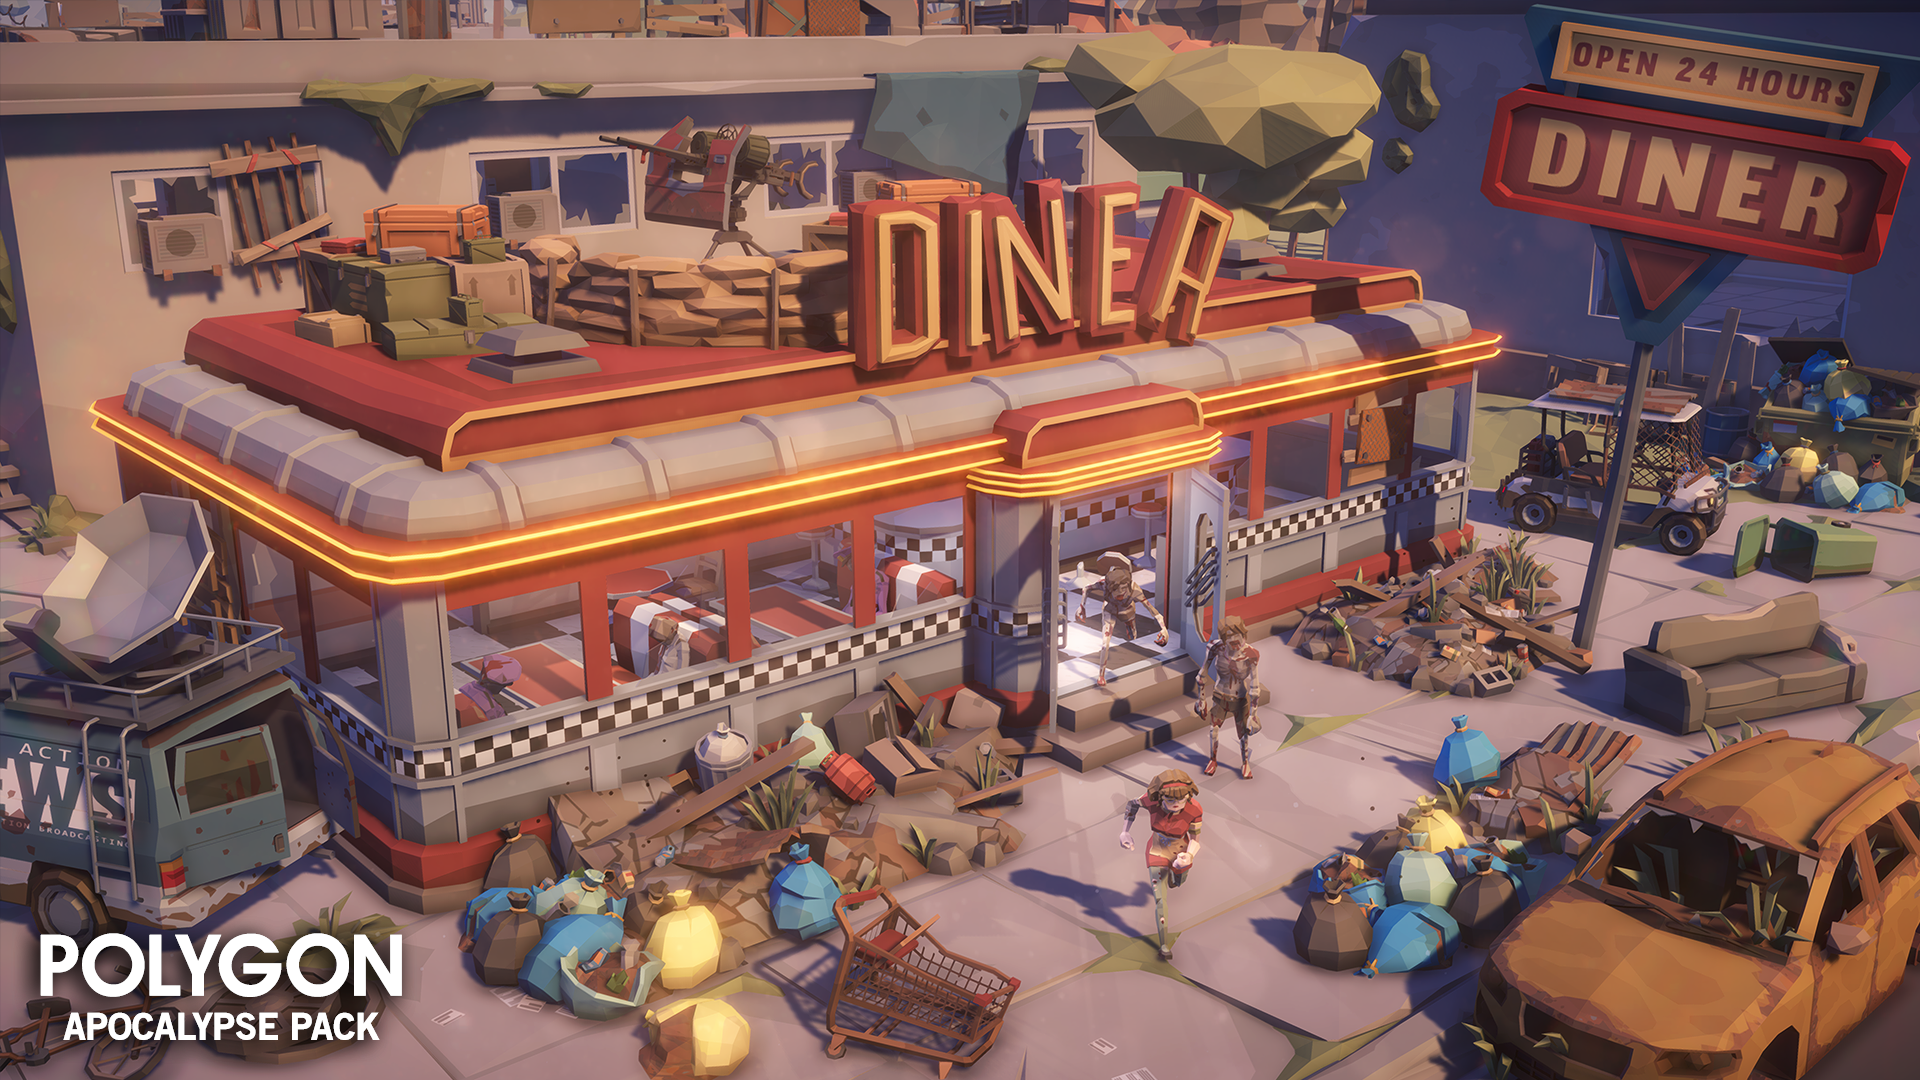 3D low poly asset of a diner in a devastated apocalypse wasteland with zombie characters walking outside into a car park